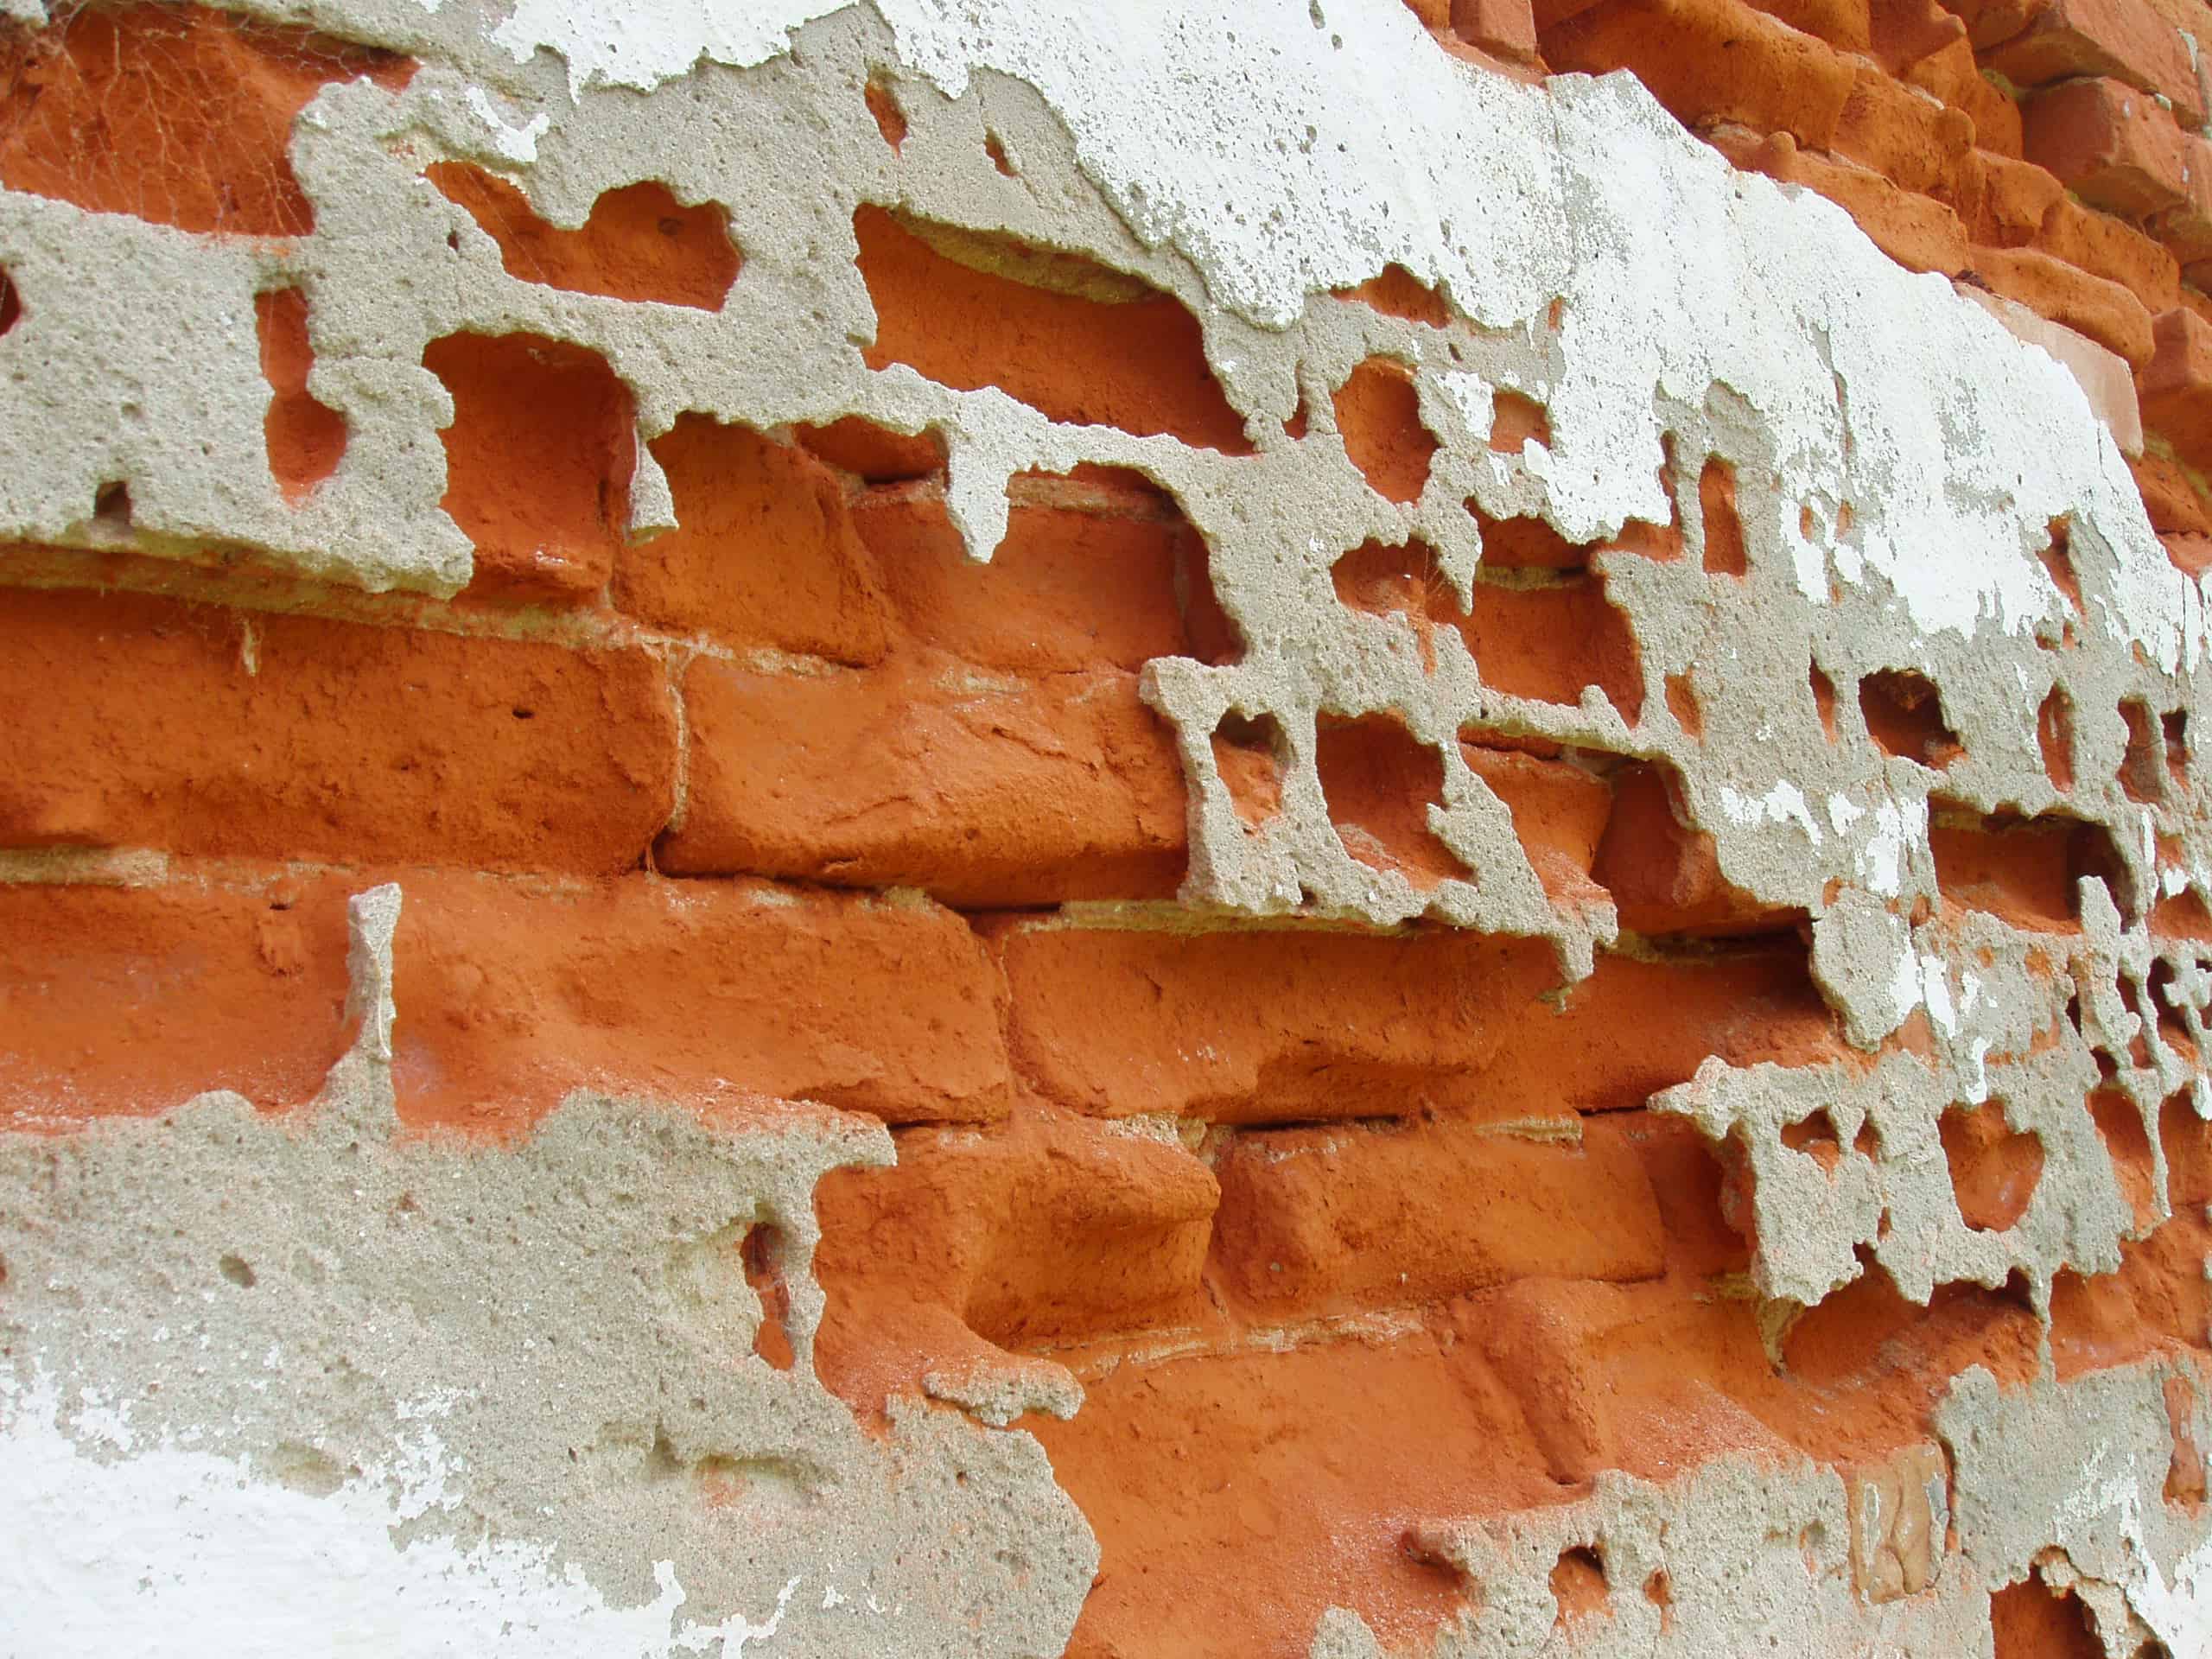 "Mortar is what connects all your brick or masonry together, and your brick is always supposed to be the harder element. If you use a harder mortar than brick, then your brick becomes the sacrificial element.”